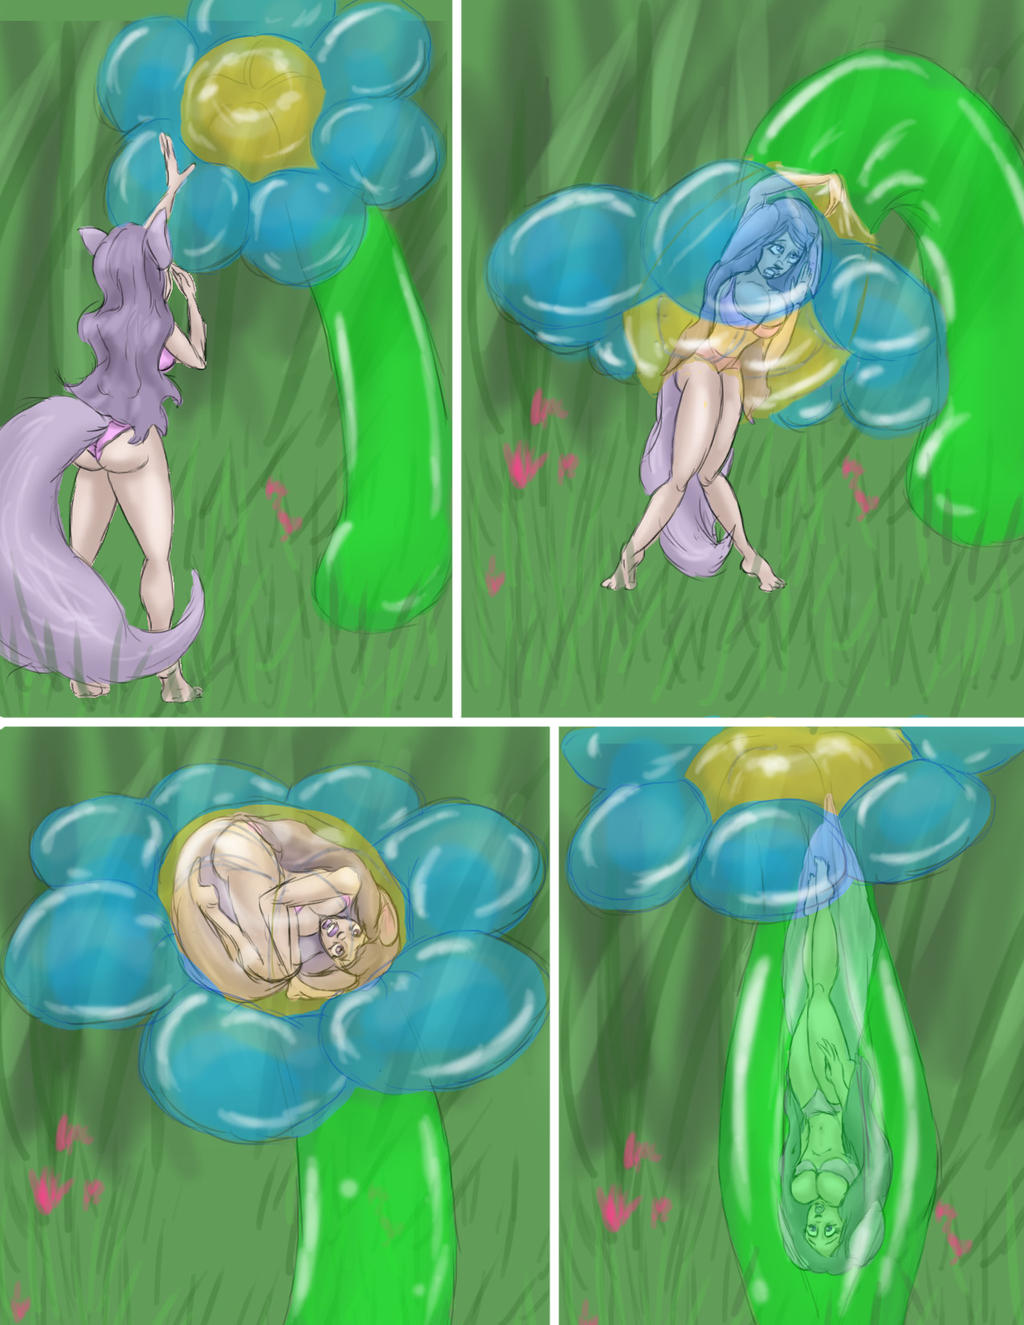 Stop And Smell The Flower Pt 1 By Spartly On DeviantArt.